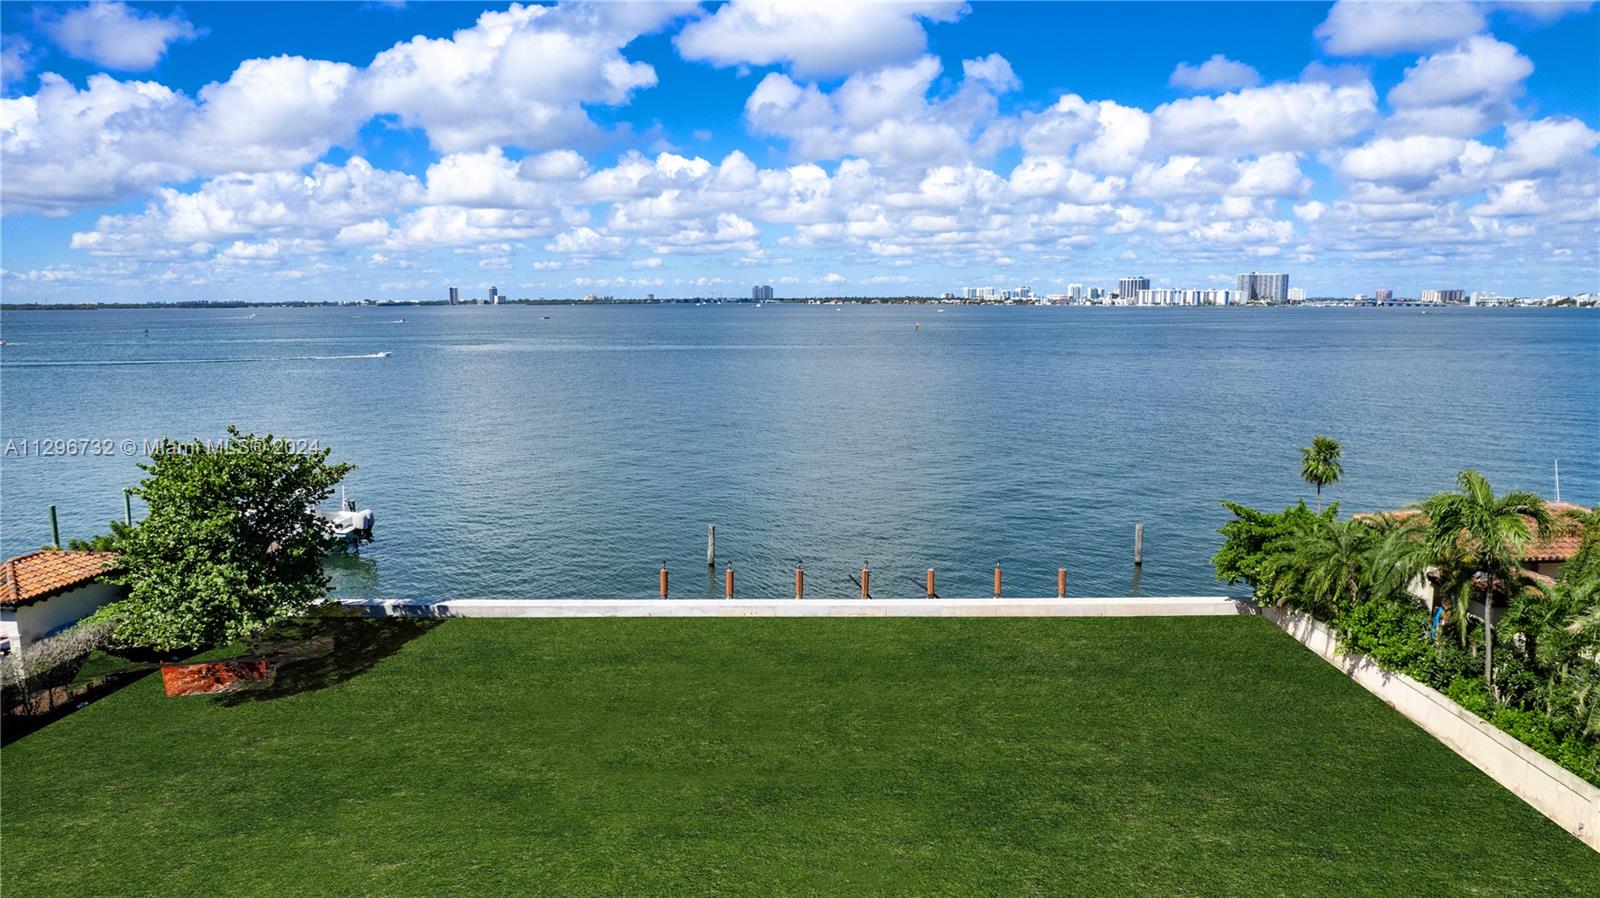 Build your dream mansion on Miami Beach’s most exclusive bayfront enclave, North Bay Rd, and enjoy spectacular water views and glorious sunsets over the Miami skyline and Biscayne Bay! This offering includes LAND with fully permitted plans by architect, Kobi Karp. The 27,334-SF lot – one of the best and largest waterfronts on North Bay Rd - boasts 150-FT of waterfront with a new seawall and dock. The plans are for a modern, 9-bedroom 14-bath home comprising 14,000-SF of lavish interiors, abundance of amenities, and exterior spaces - including a rooftop, positioned to capture the entirety of the dreamy views. Live among extravagant mansions and experience a world-class waterfront lifestyle. Located minutes to La Gorce Golf Club, beach, Sunset Harbour, Bal Harbour, Design District, Brickell.